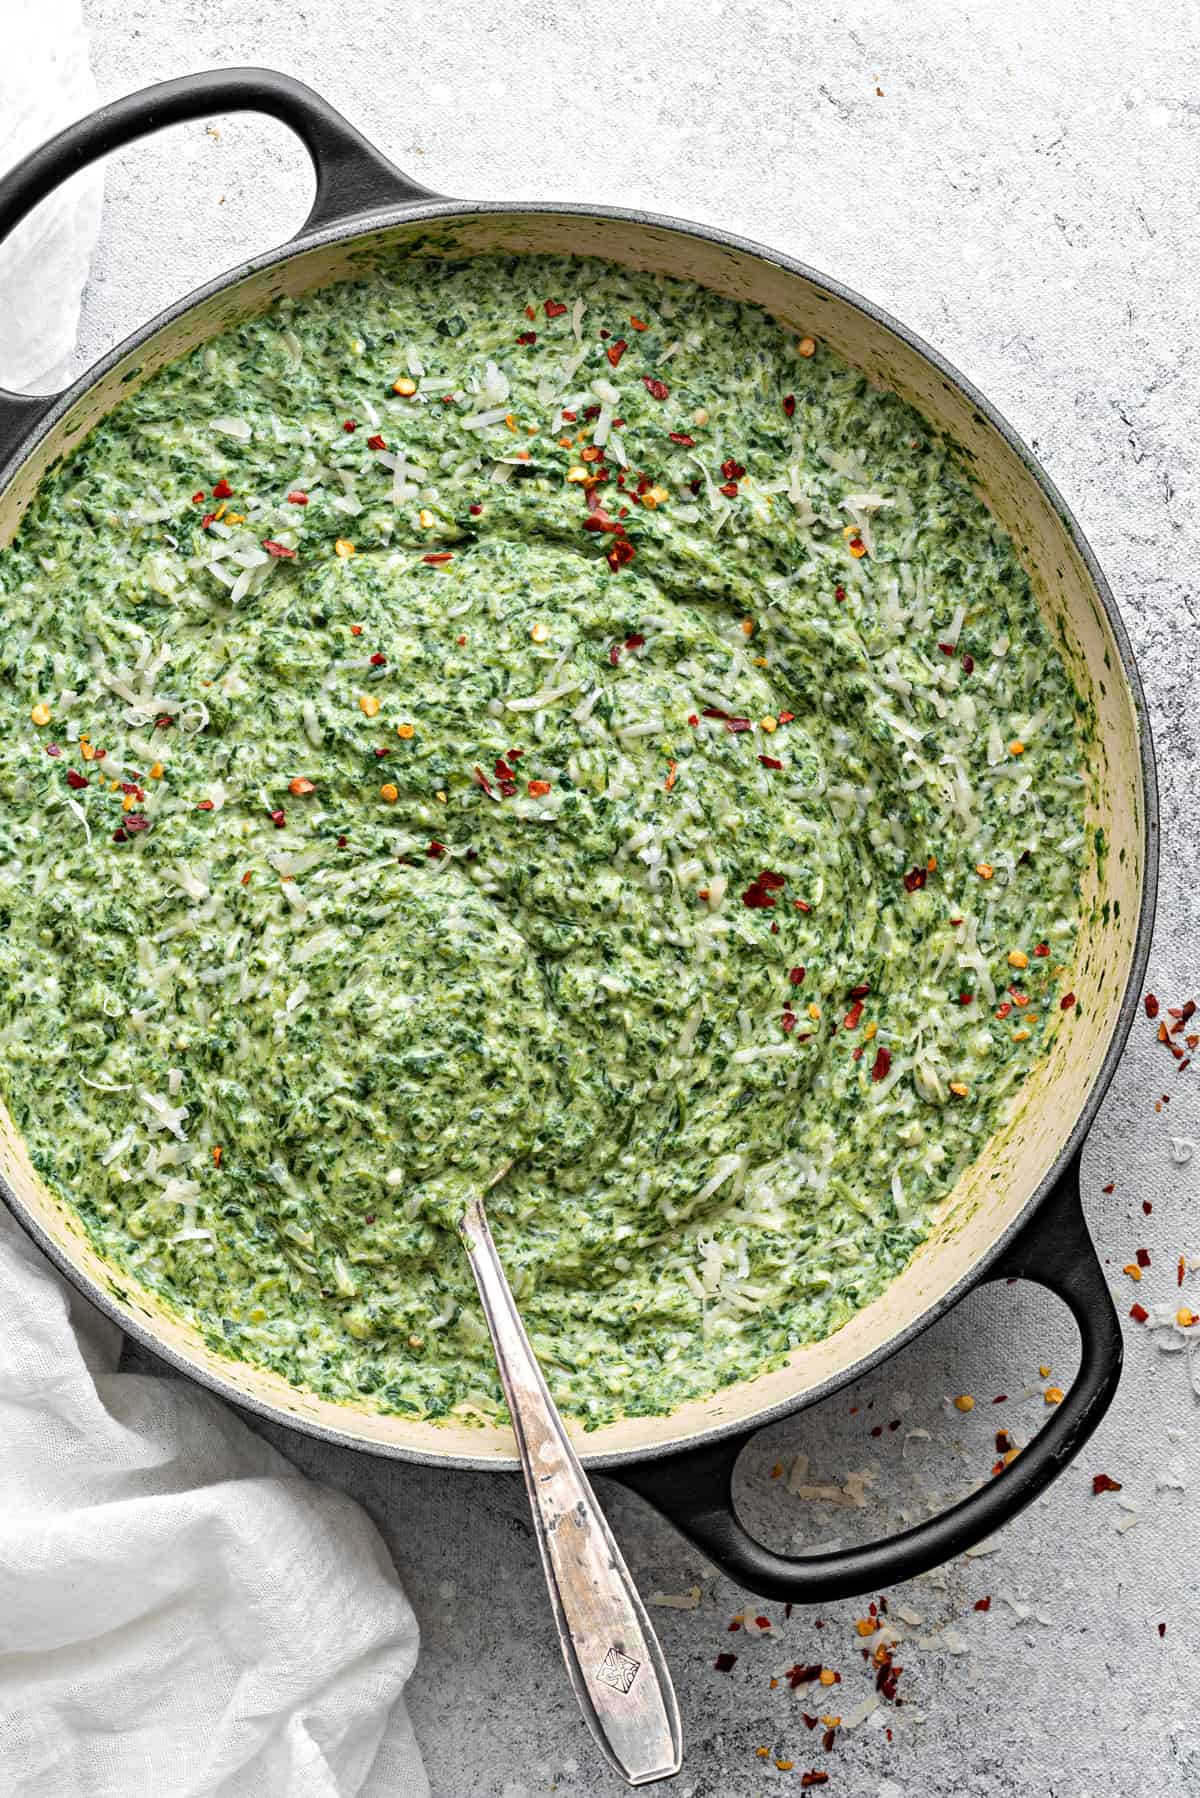 Homemade creamed spinach in a large cooking pot, with sprinkles of red pepper on top.